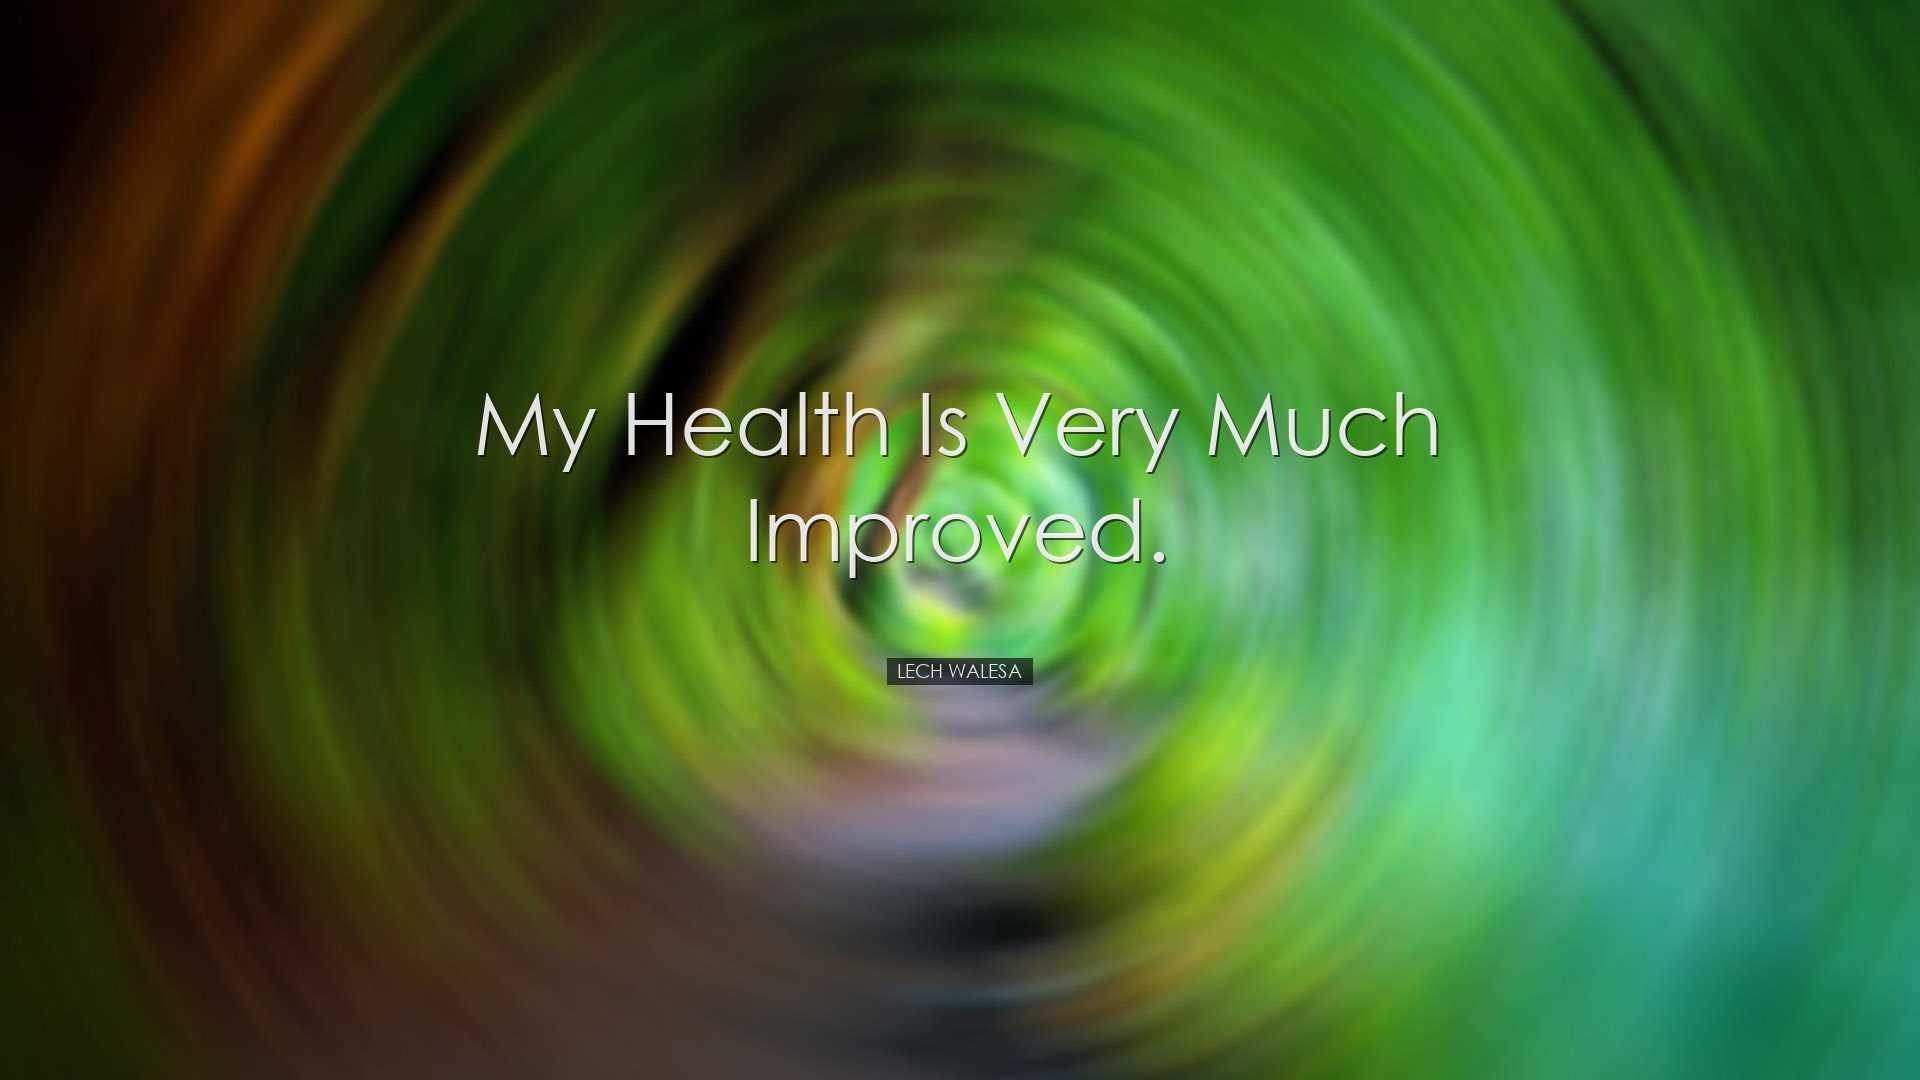 My health is very much improved. - Lech Walesa